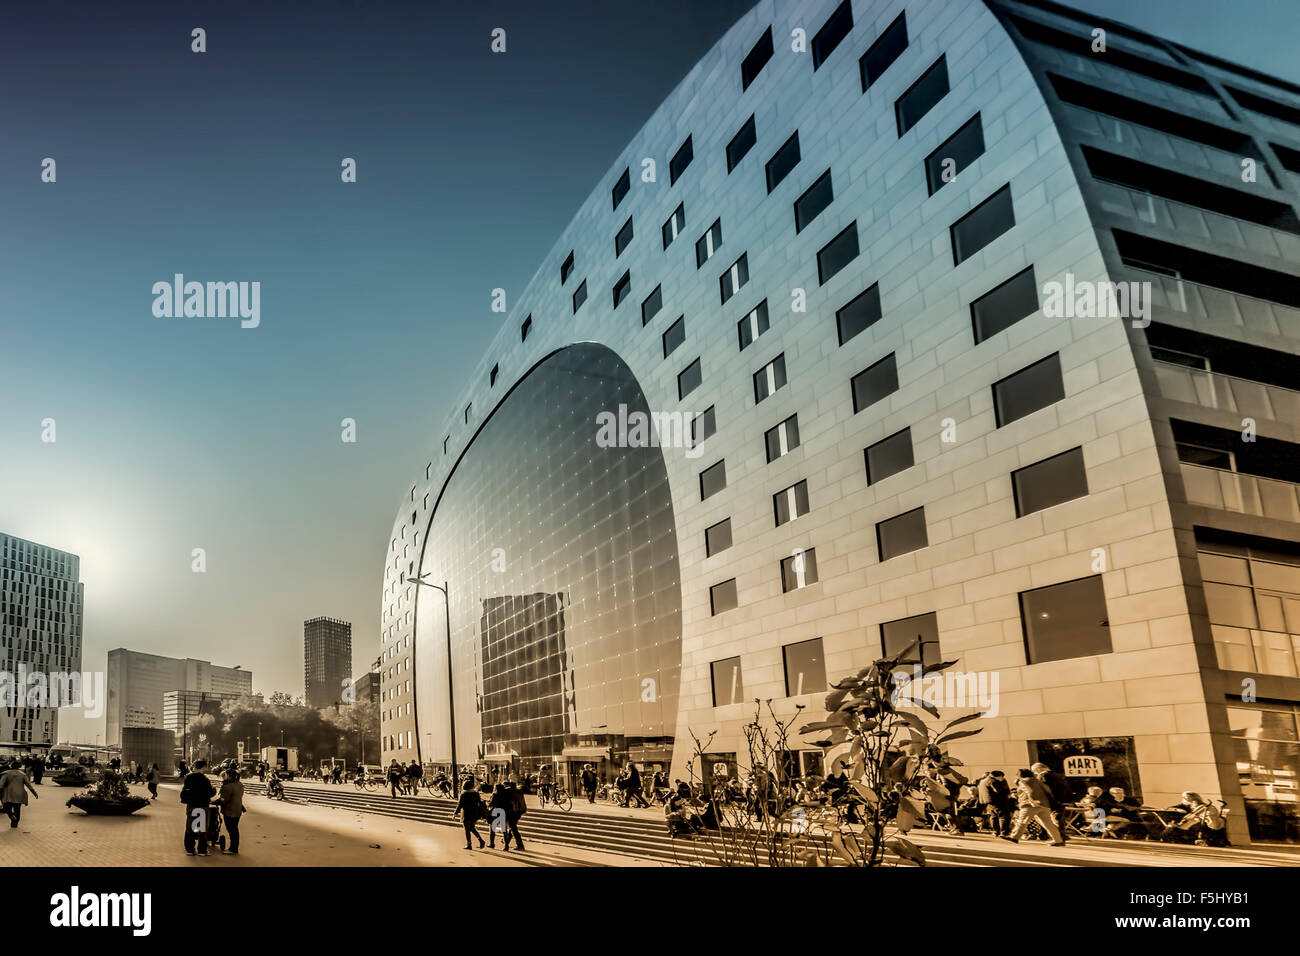 Exterior view of the new Market hall ( Markthal ) in Rotterdam, South Holland, The Netherlands. Digital art and illustration. Stock Photo